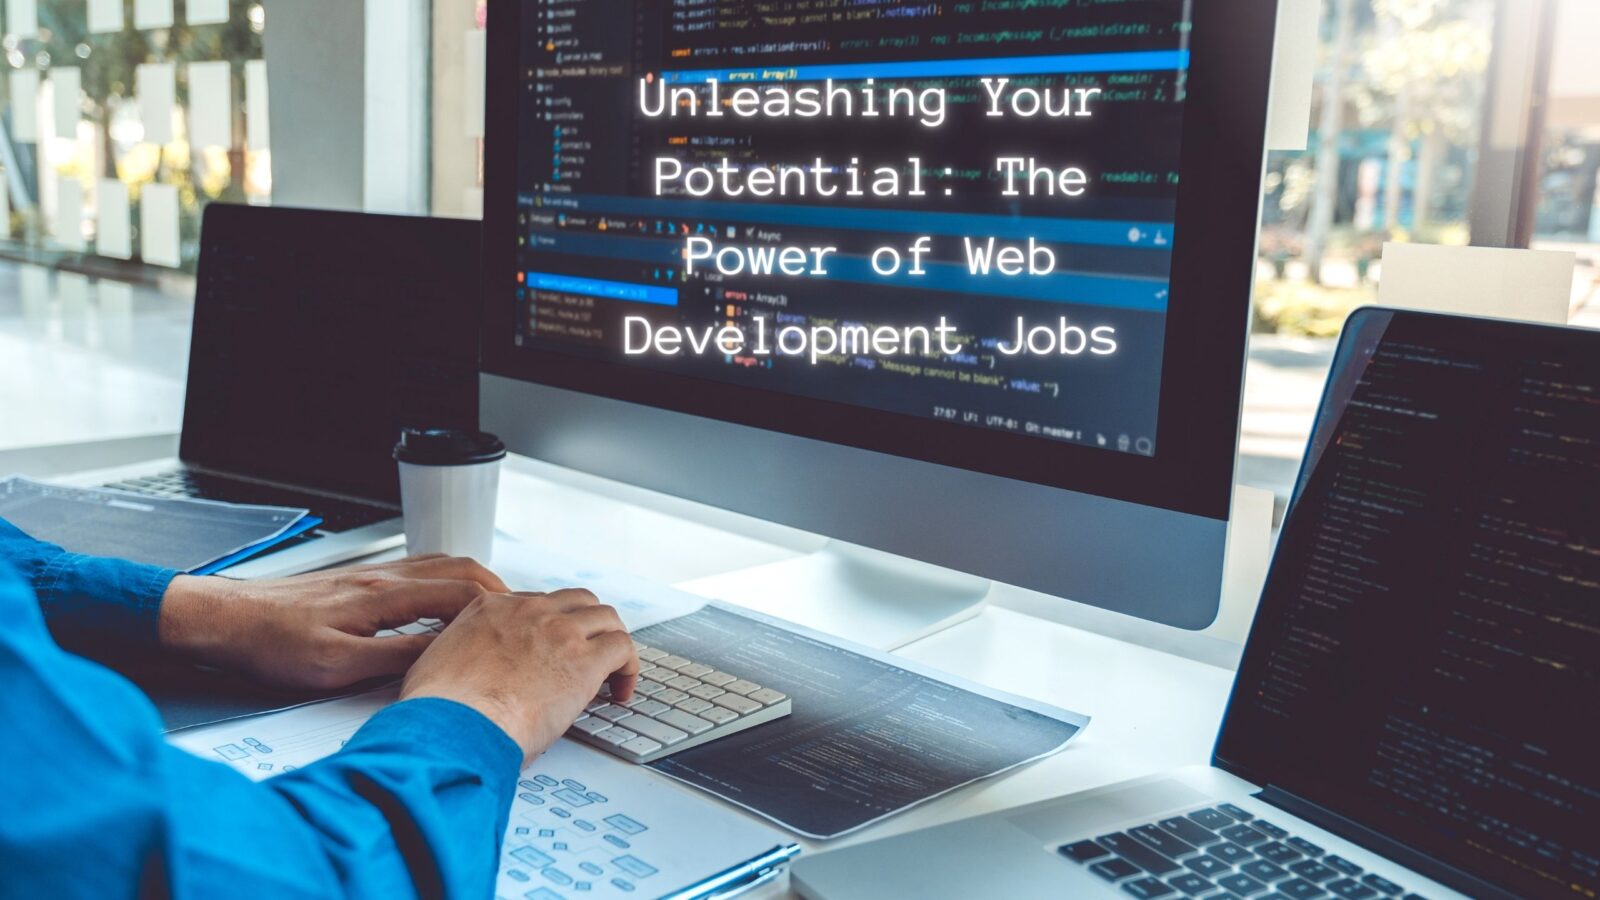 Unleashing Your Potential: The Power of Web Development Jobs